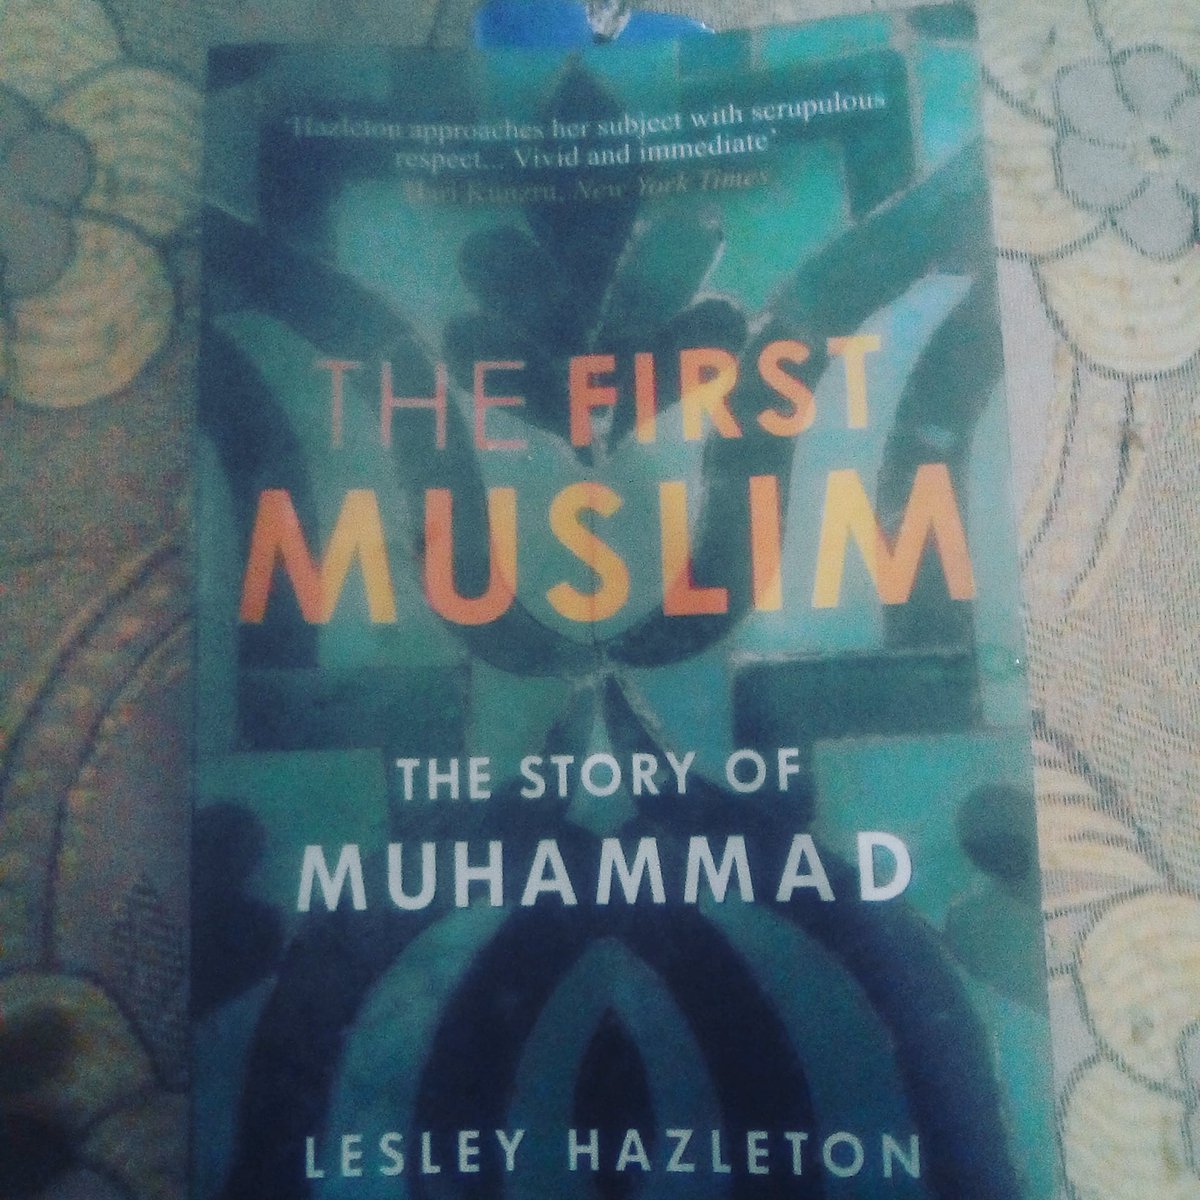 İ just finished this book. İ have been privileged to read it. After #vladmirputin the russian president this #jew  lady #lesleyhazleton is the one I really wished, would be Muslim. Utilized the weekend best way possible #alhumdulilah #thefirstmuslim
@accidentaltheo @RivkahAdler